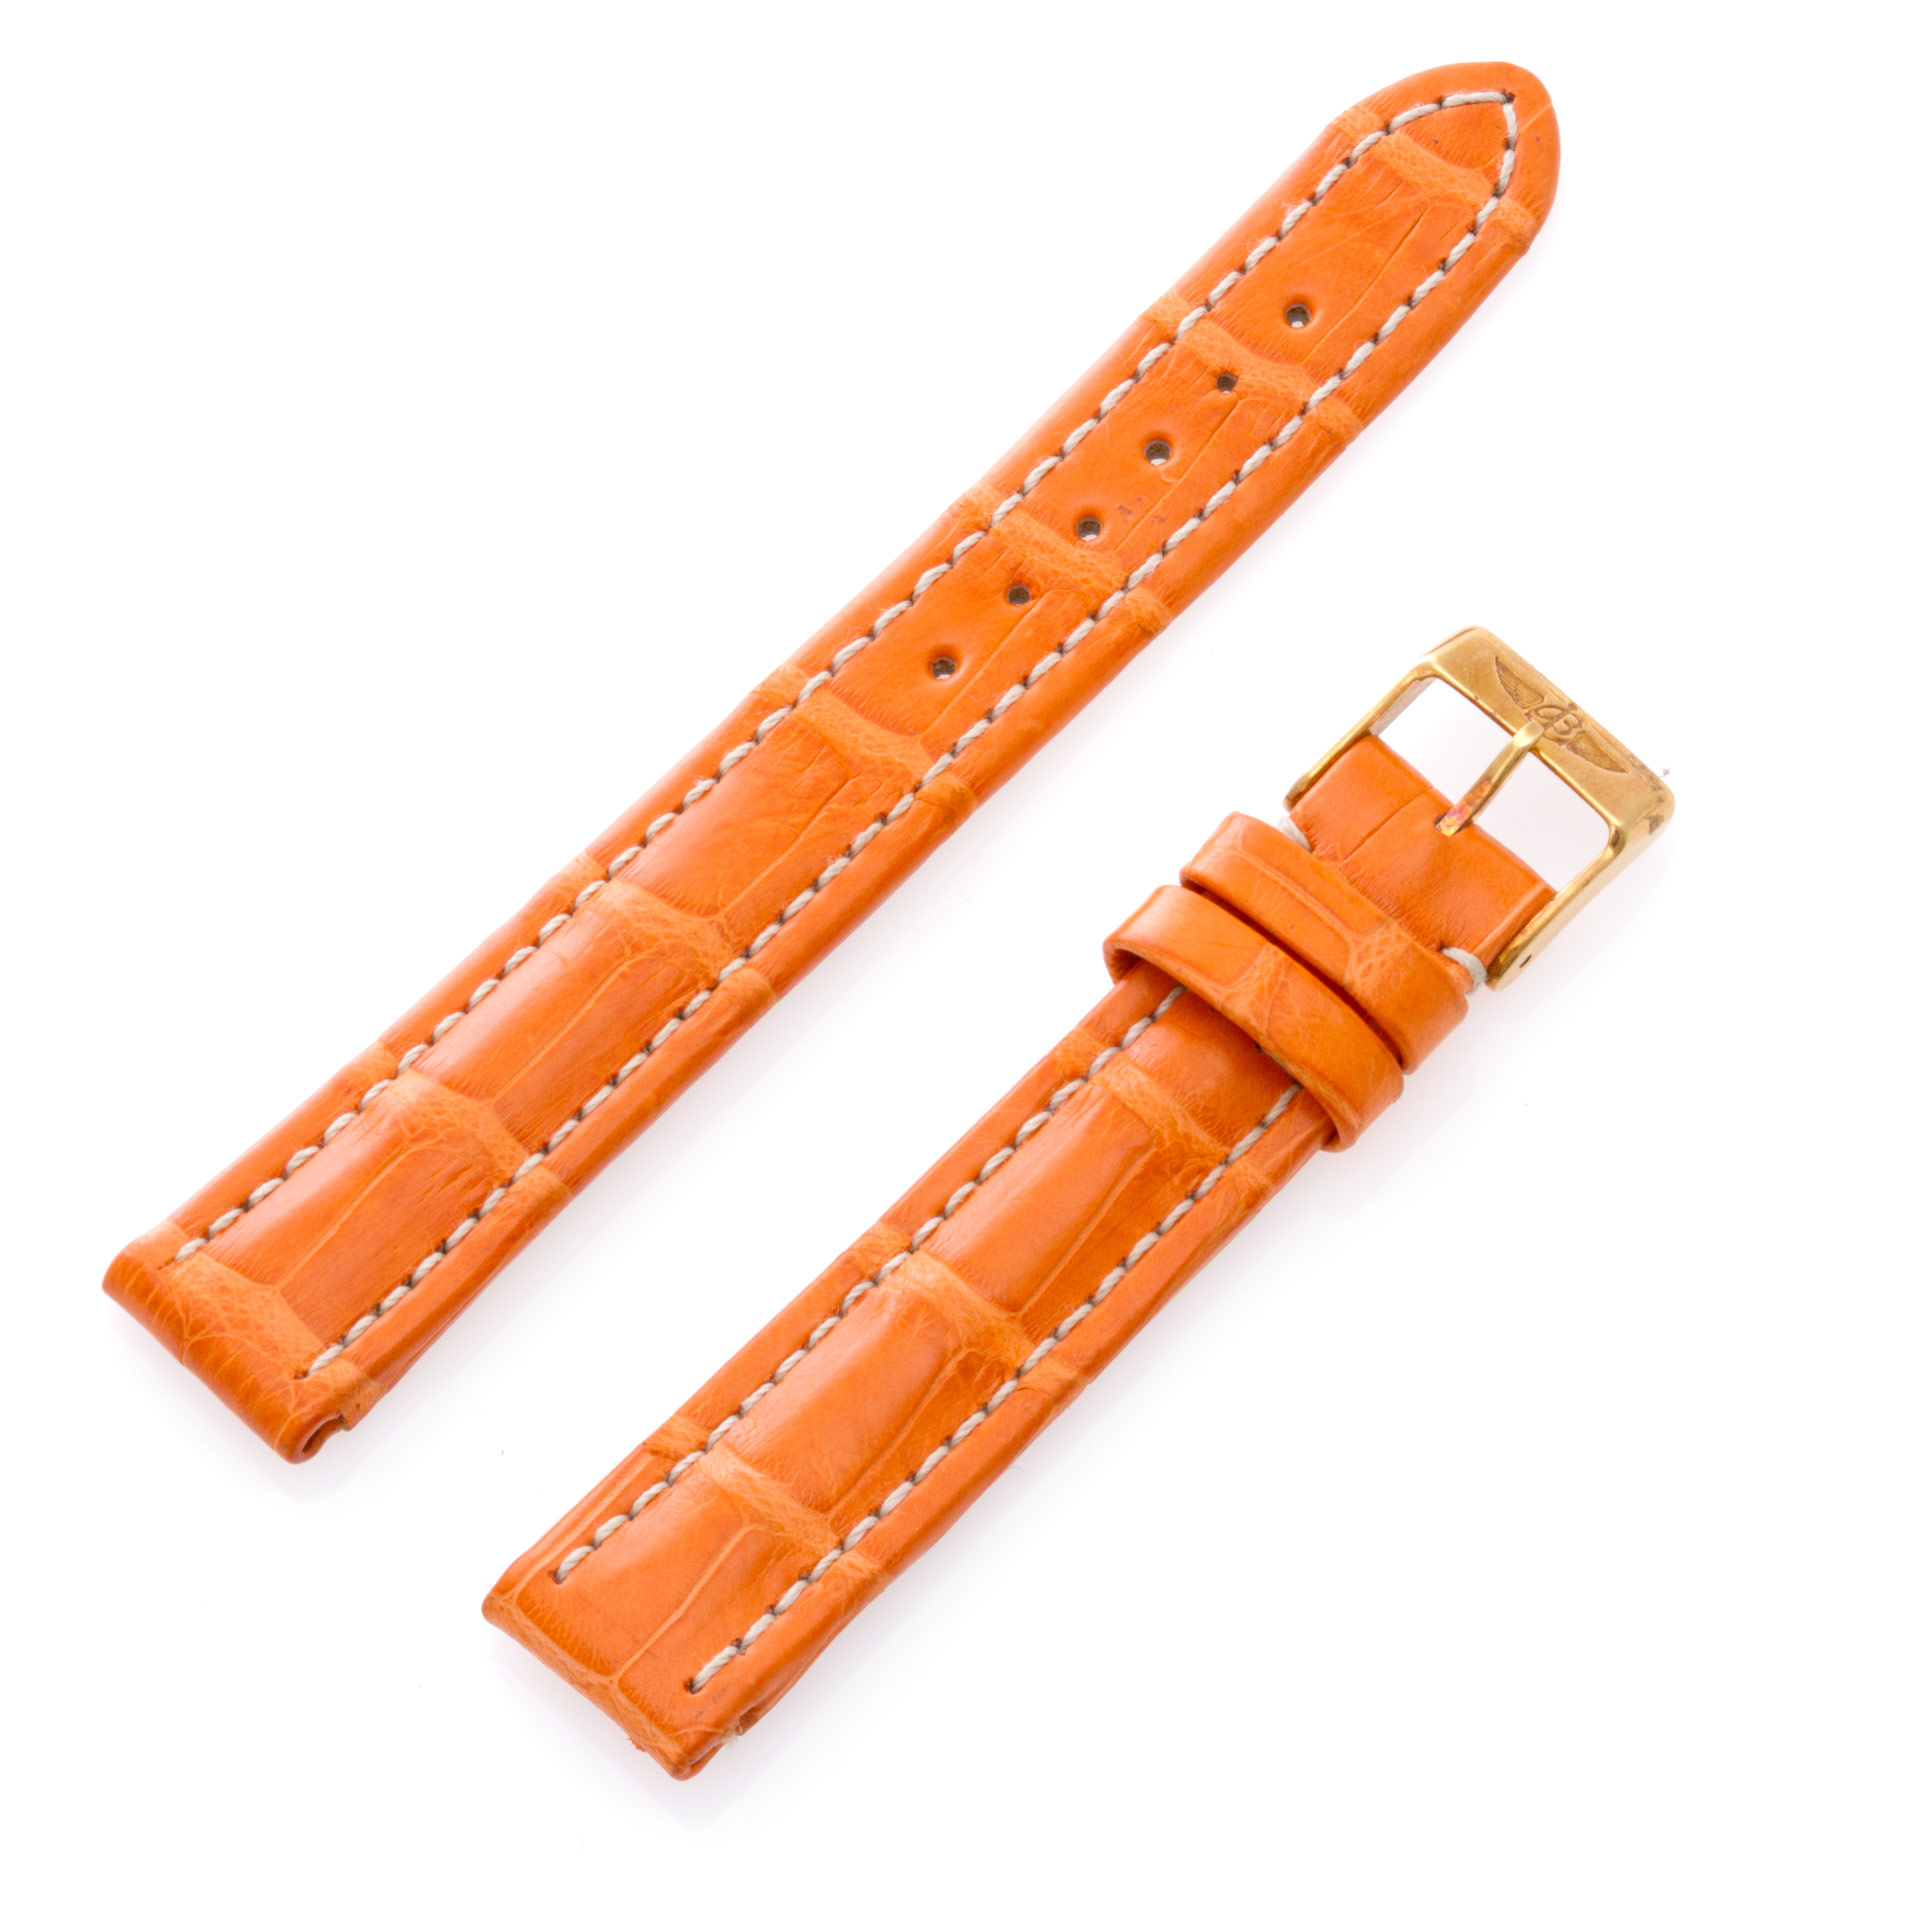 Breitling (15mm x 14mm) orange crocrodile strap with gold buckle